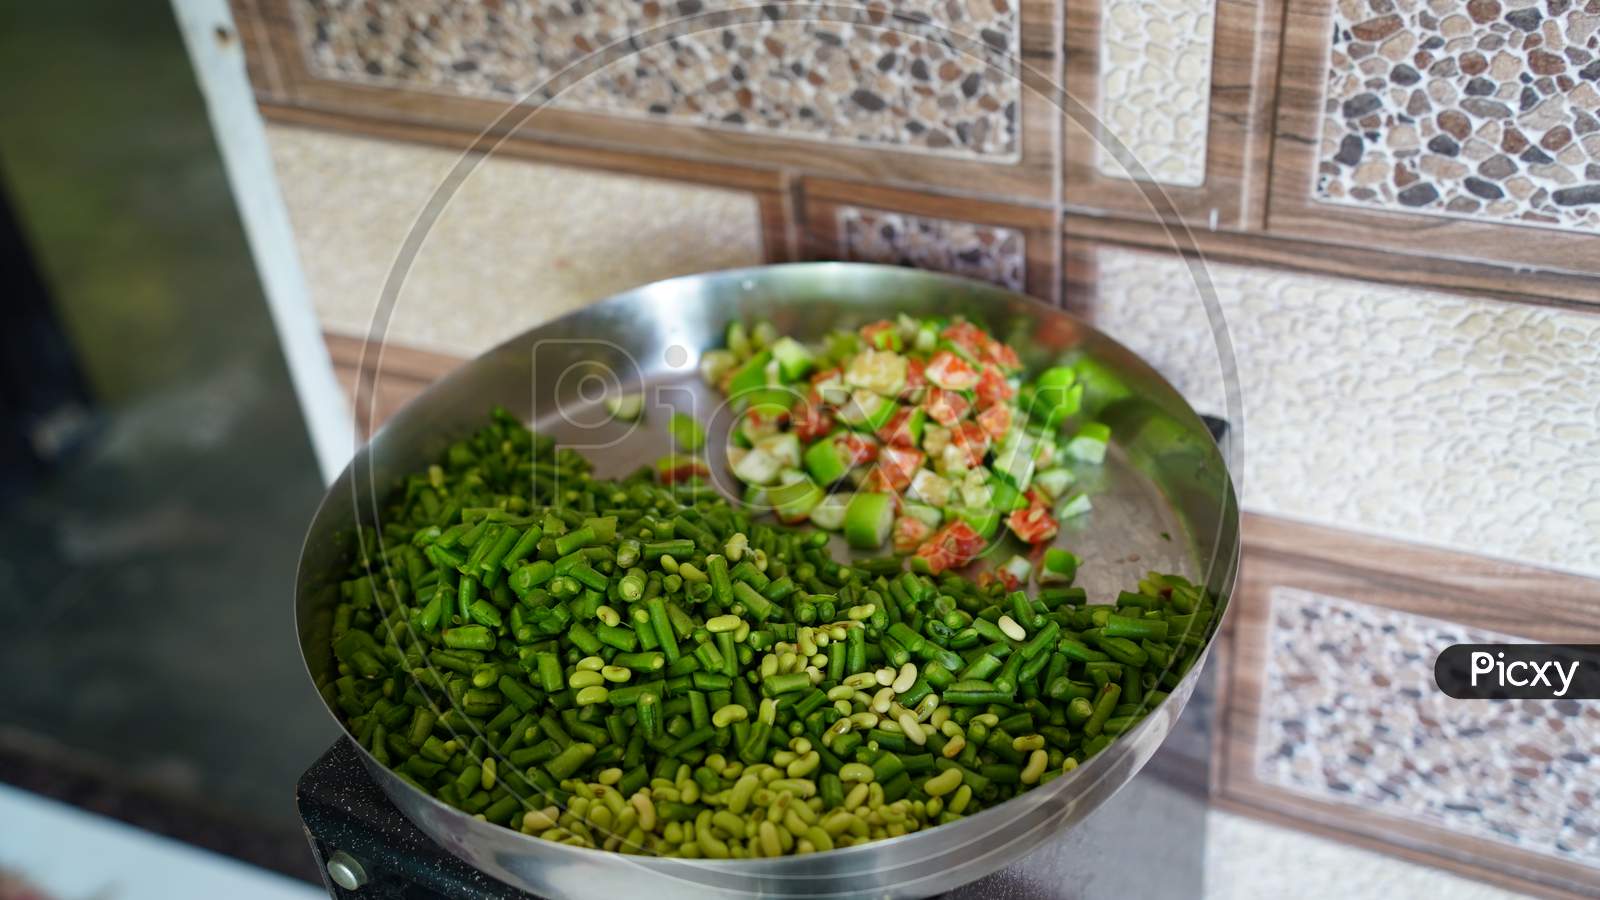 Fresh And Chopped Green Vegetables In A Plate In The Kitchen.